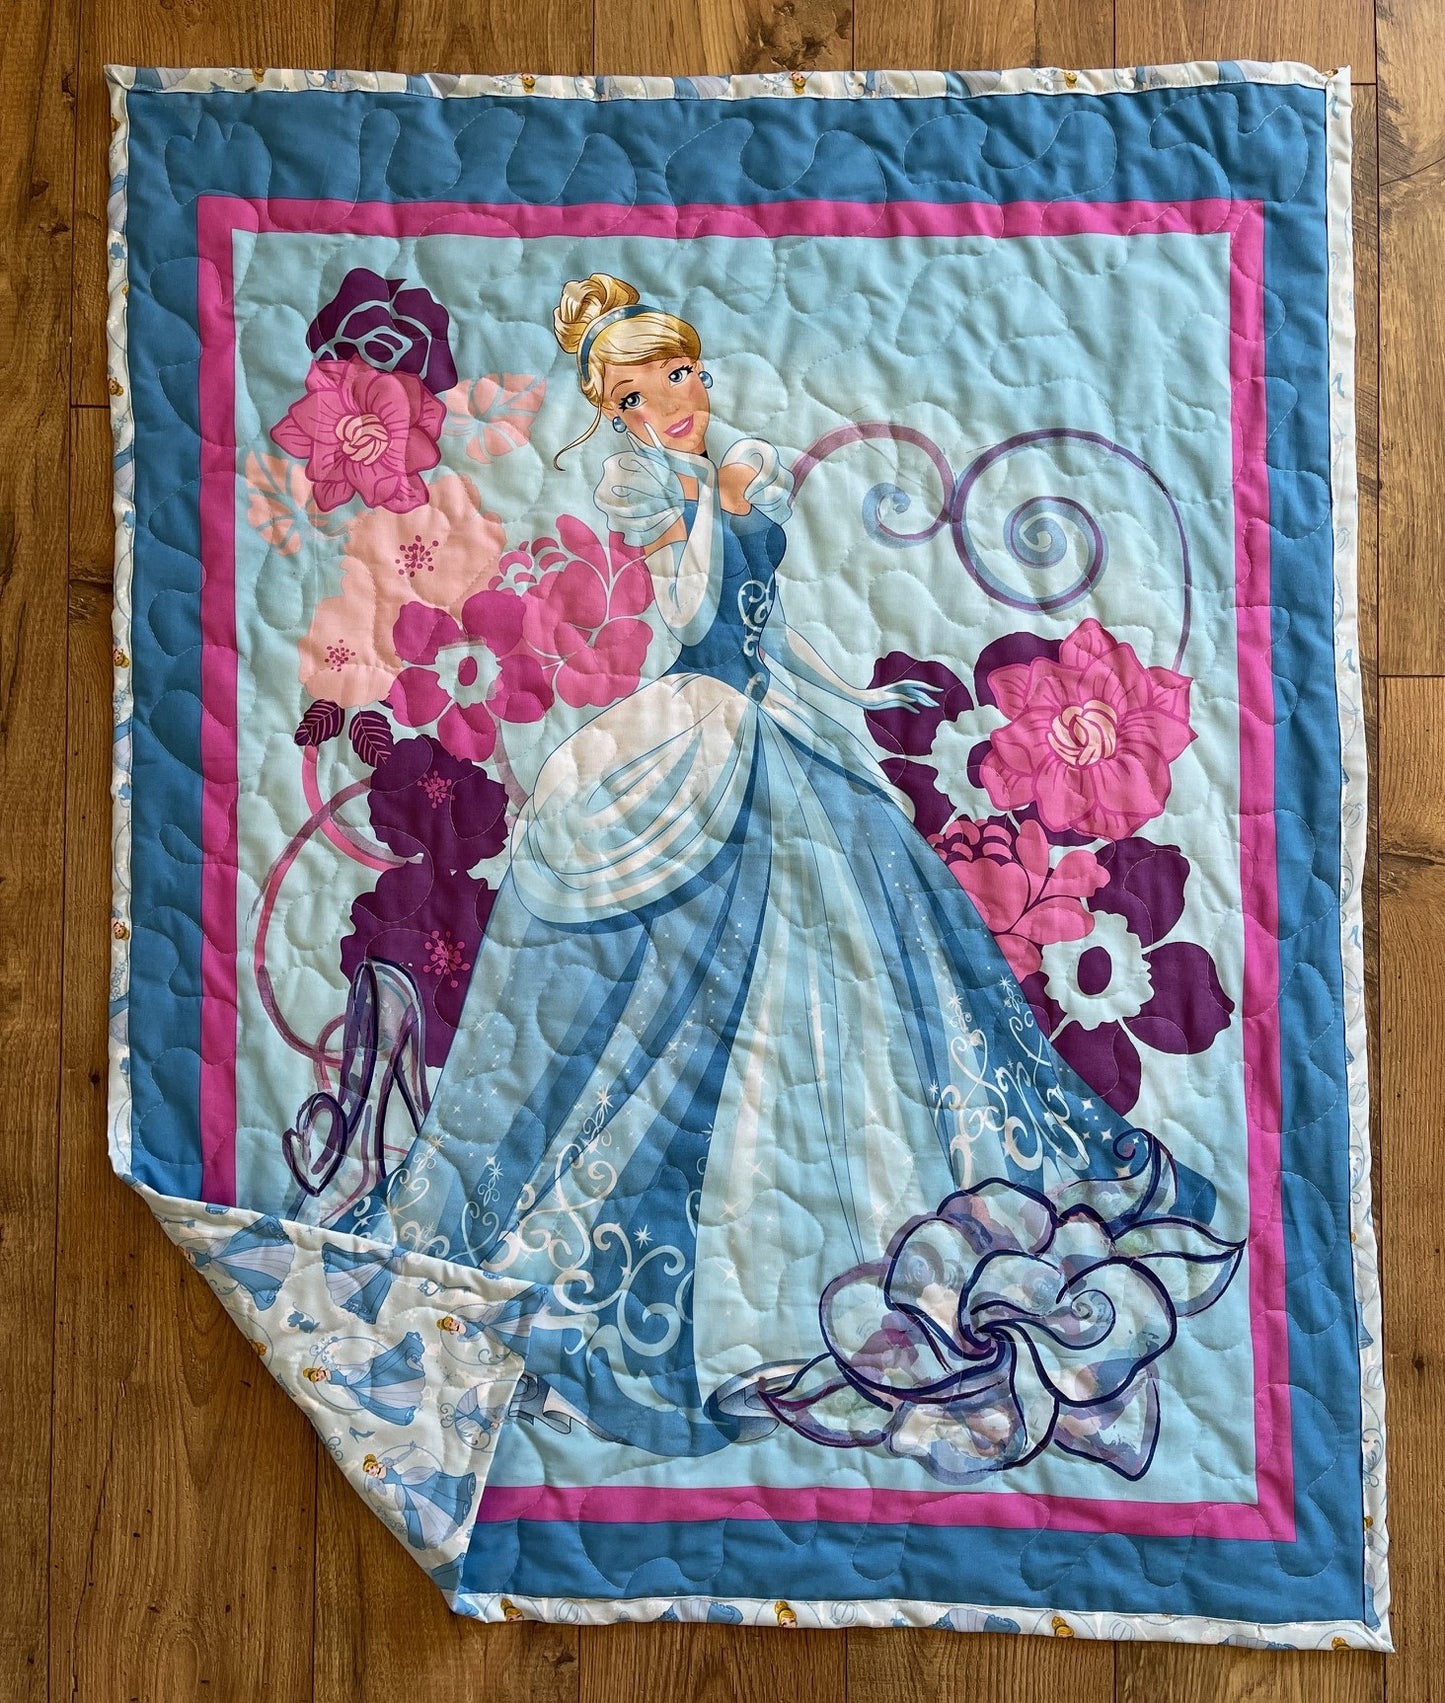 CINDERELLA Inspired Quilted Blanket 36"x44" GLASS SLIPPER FLORAL